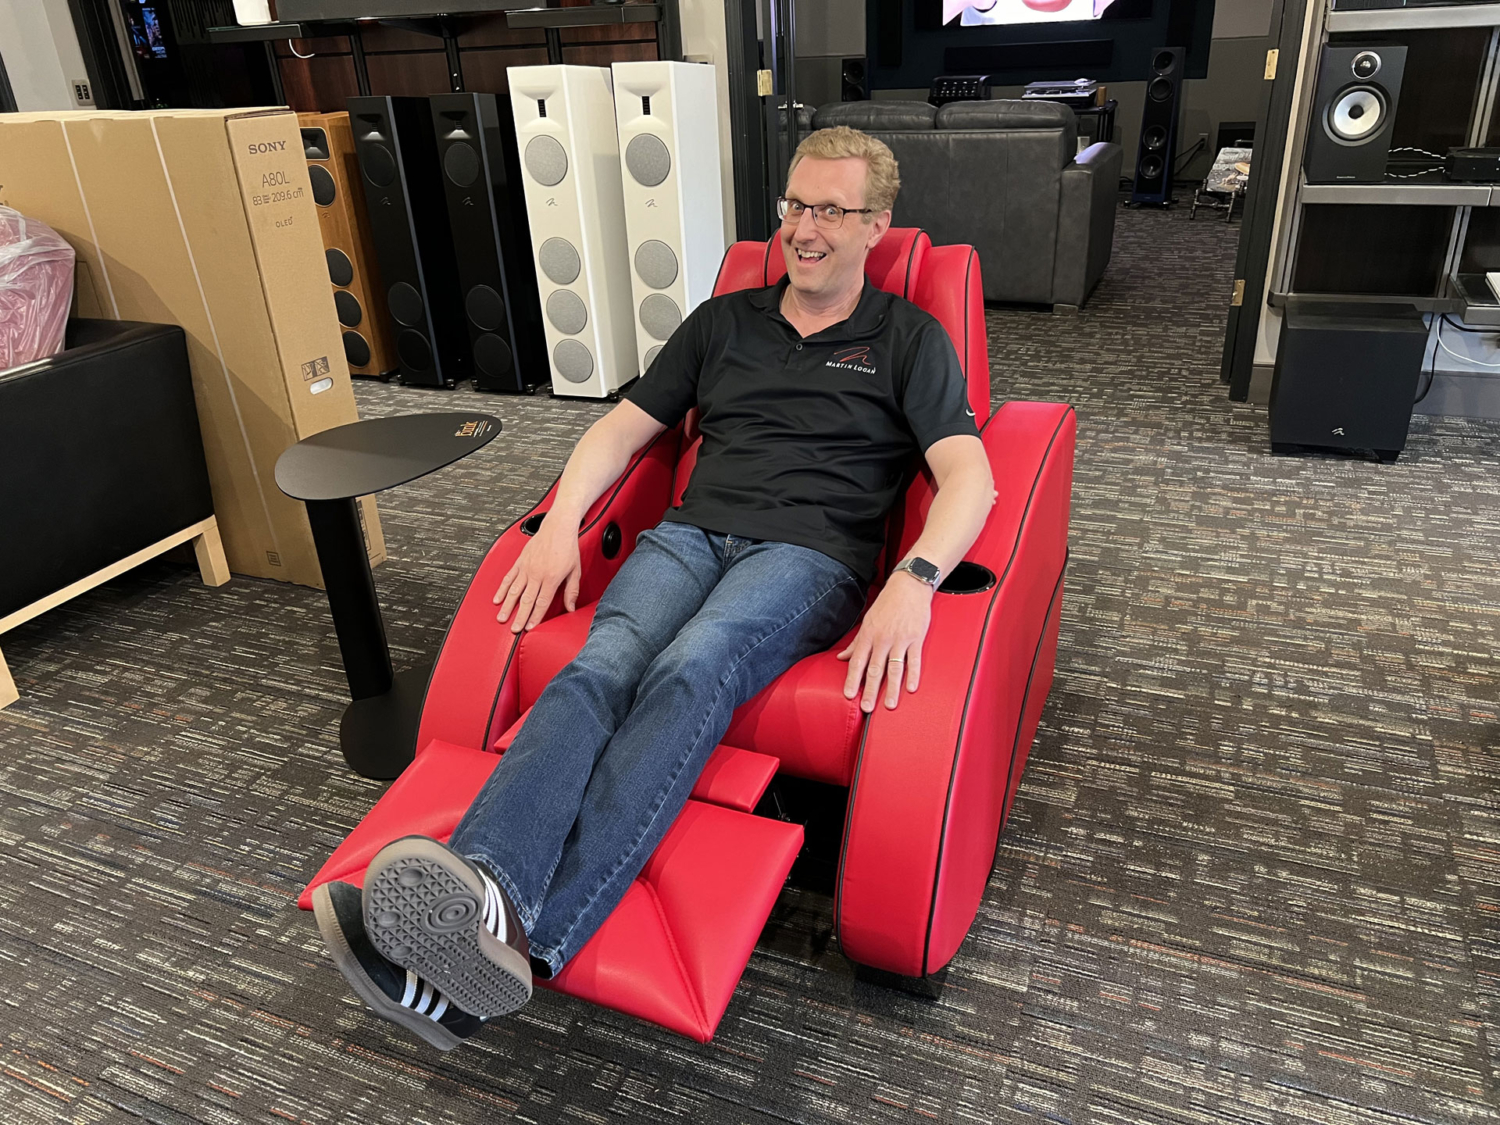 Come down and sit in a premium example of Elite Theater Seating at K&W Audio today. It will make you very happy! Just ask Andrew.